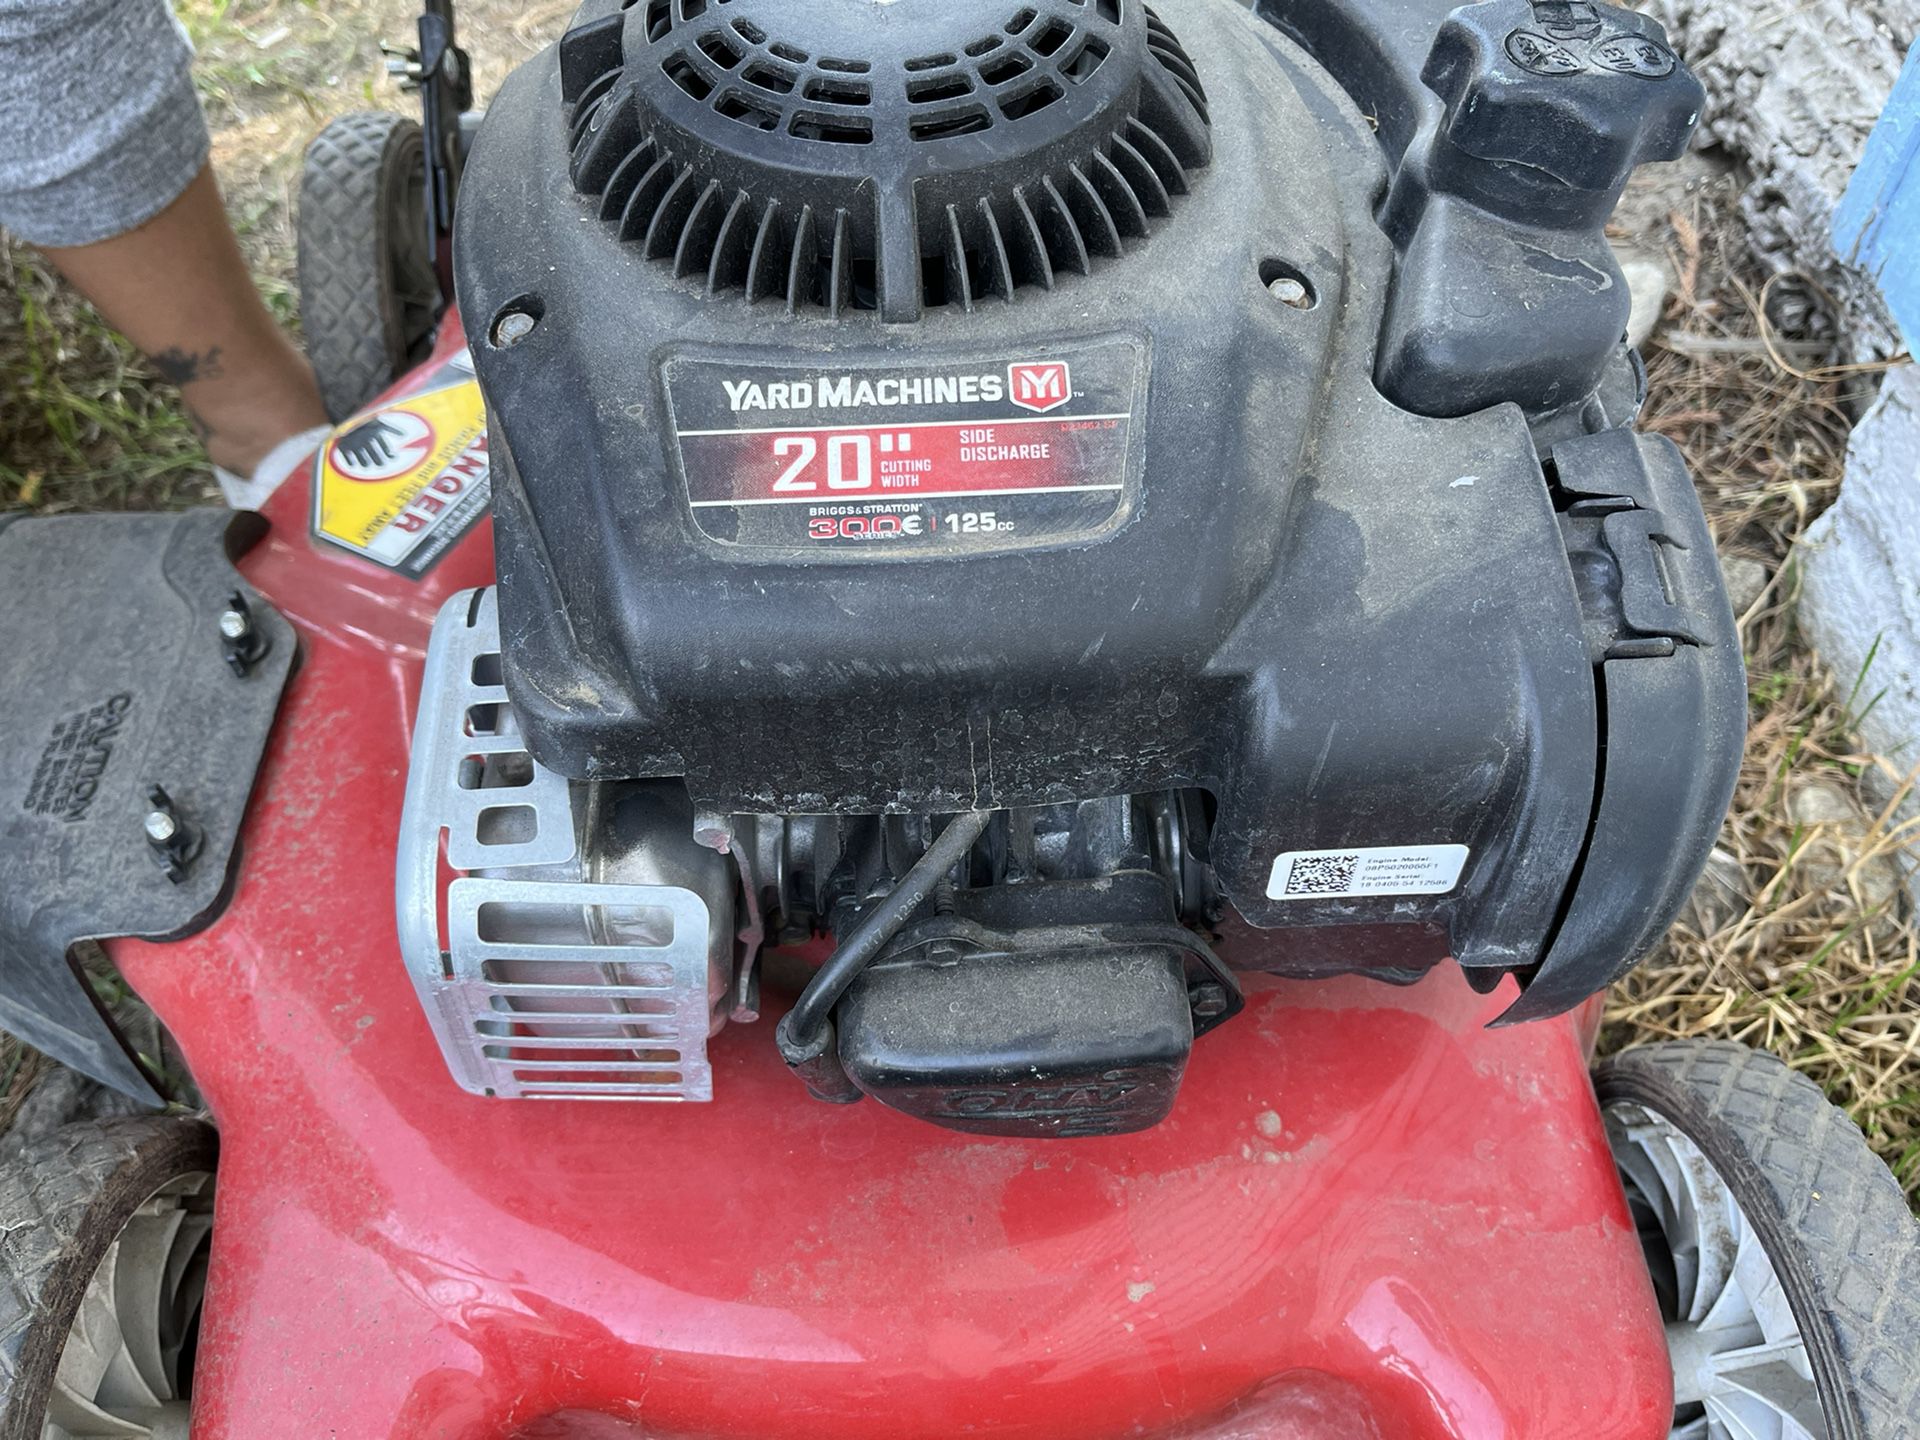 Nearly new Briggs and Stratton lawnmower